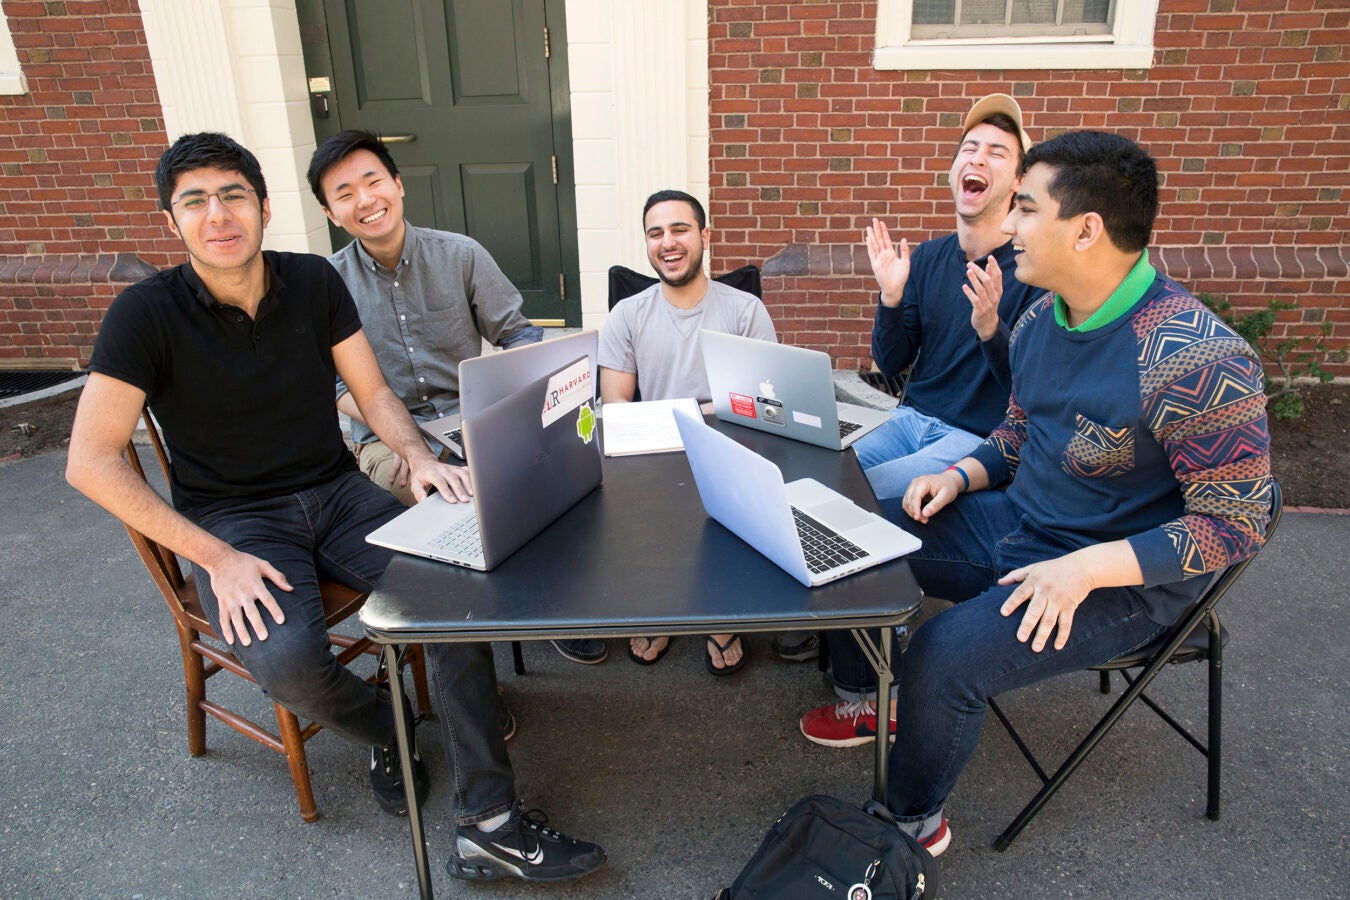 Roommates in Wigglesworth sit outside their dorm on what they call their "porch": (l to r) Soheil Sadabadi '20 (Iran), Andrew Cho '20 (AZ), Michael Shadpour '20 (CA), Scott Kall '20 (MA), and Arpan Sarkar '20 (TN).